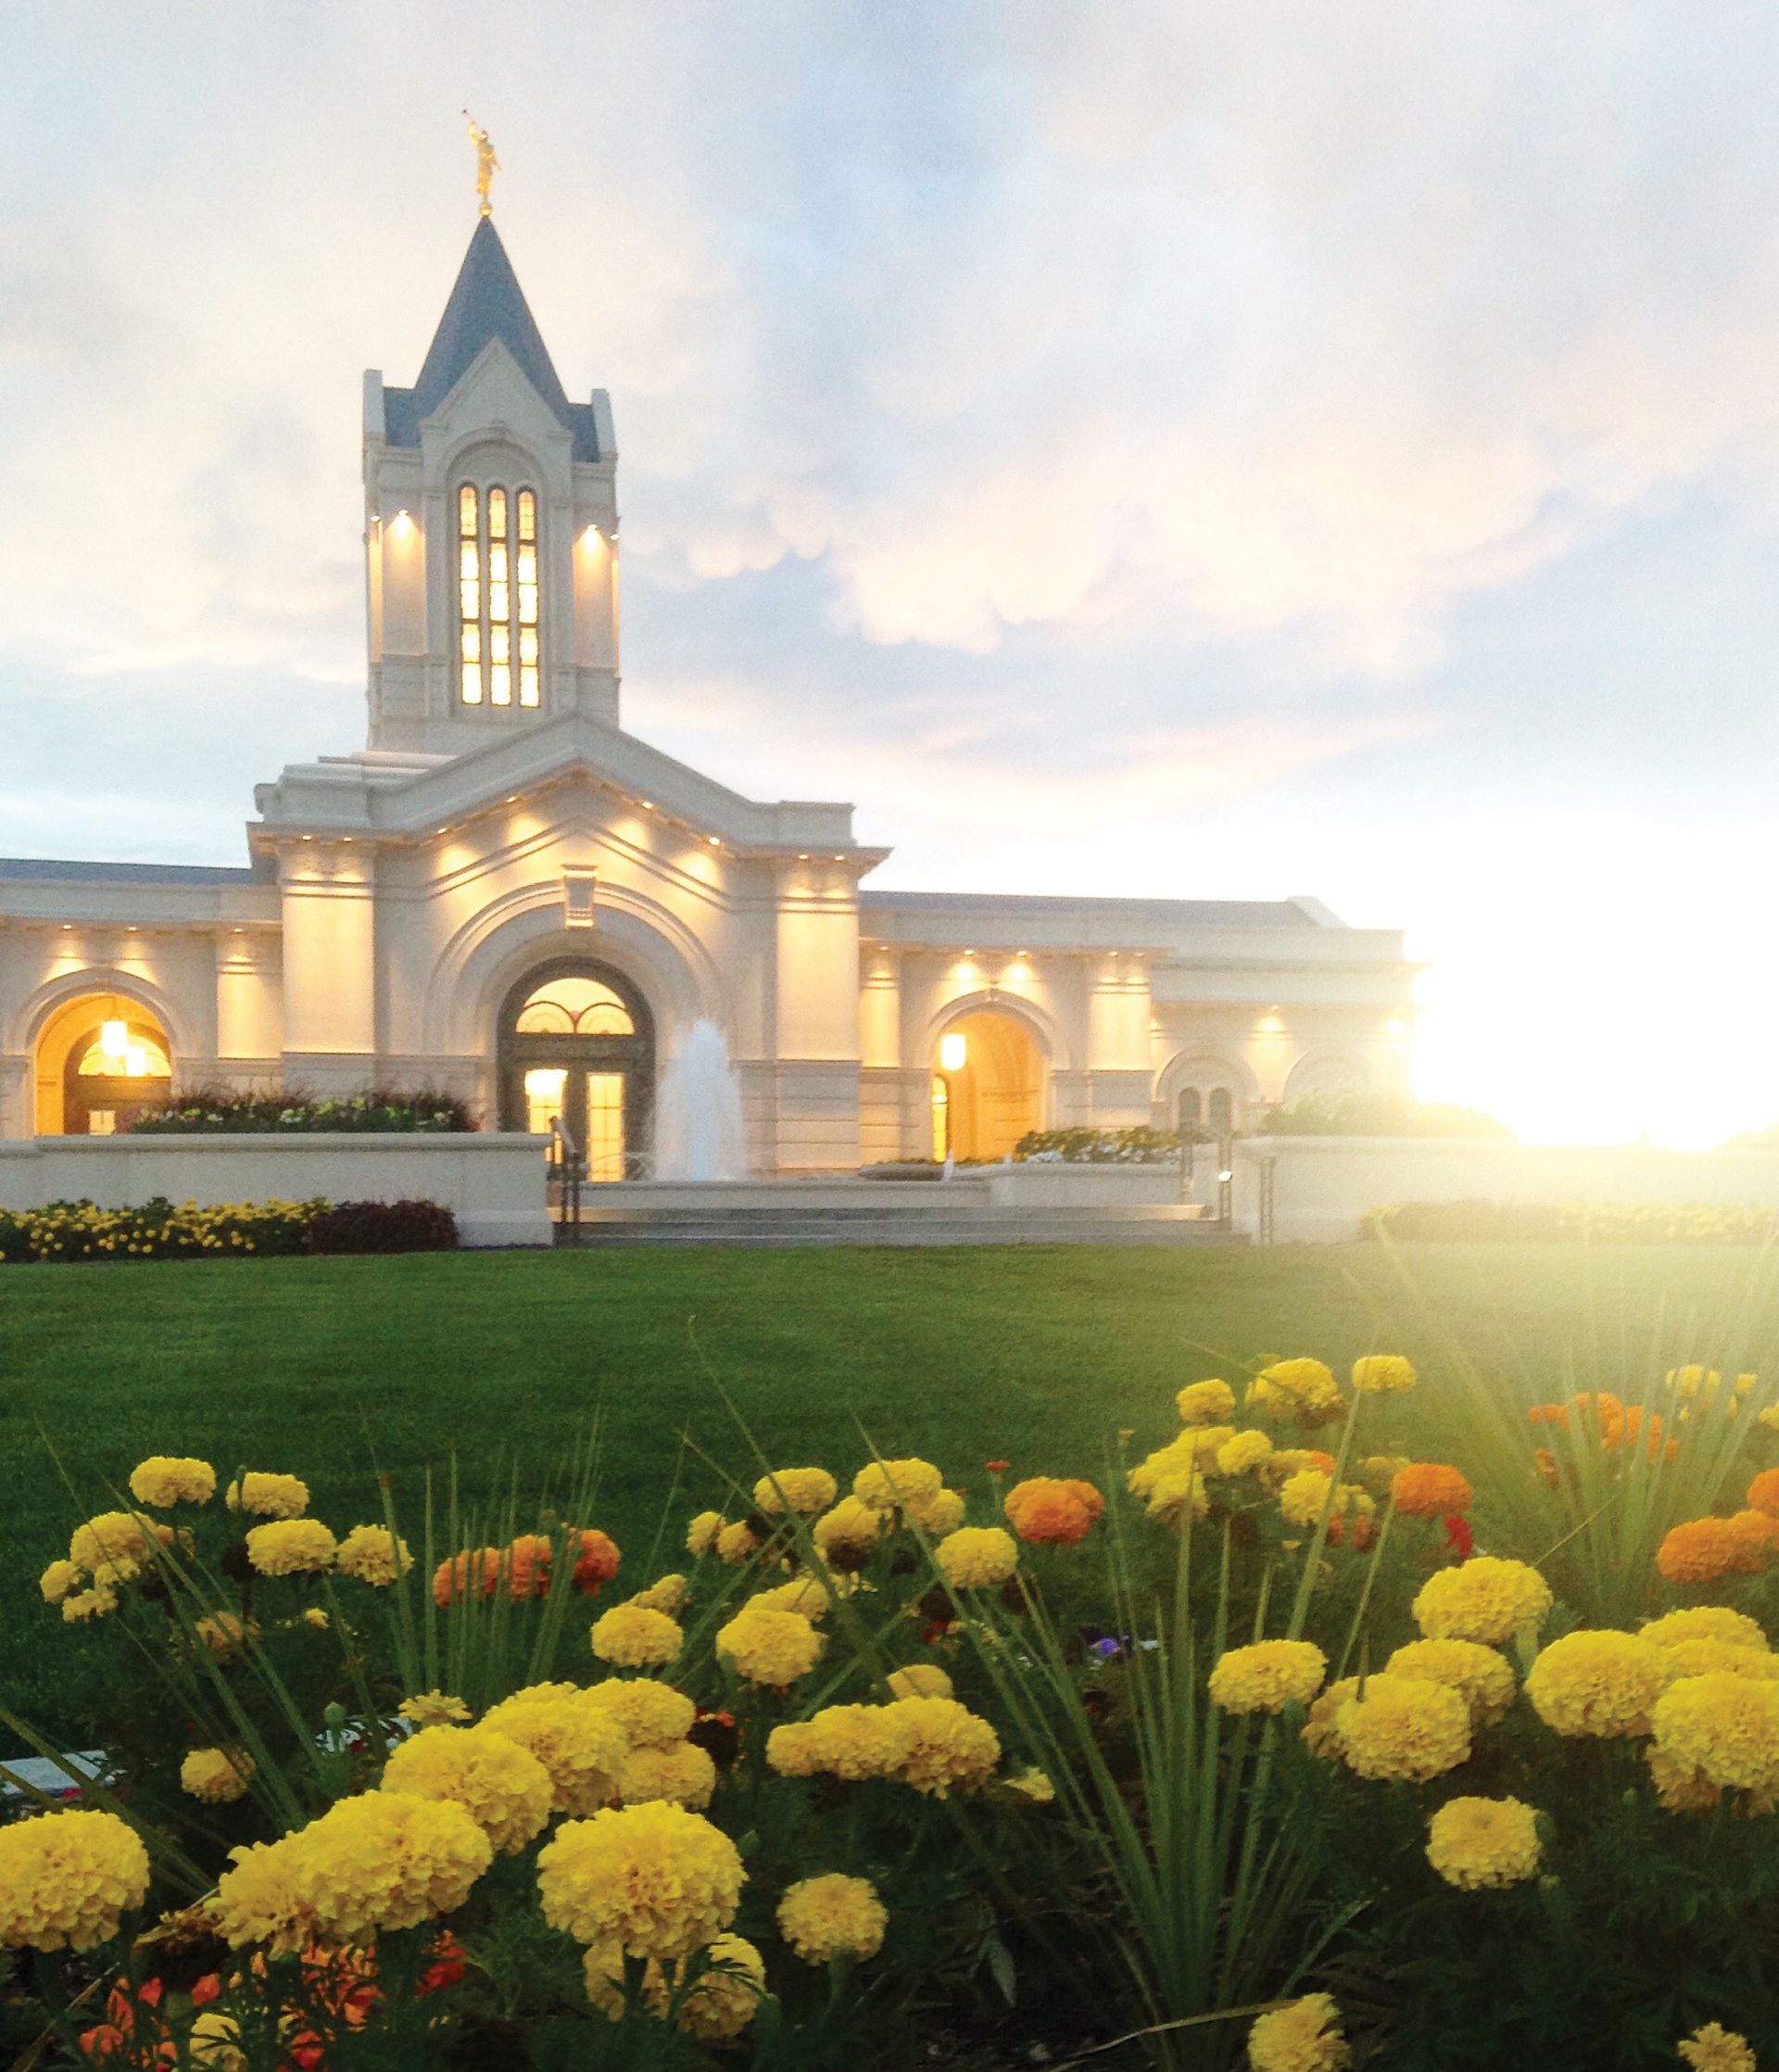 The Fort Collins Colorado Temple with yellow flowers in the foreground.